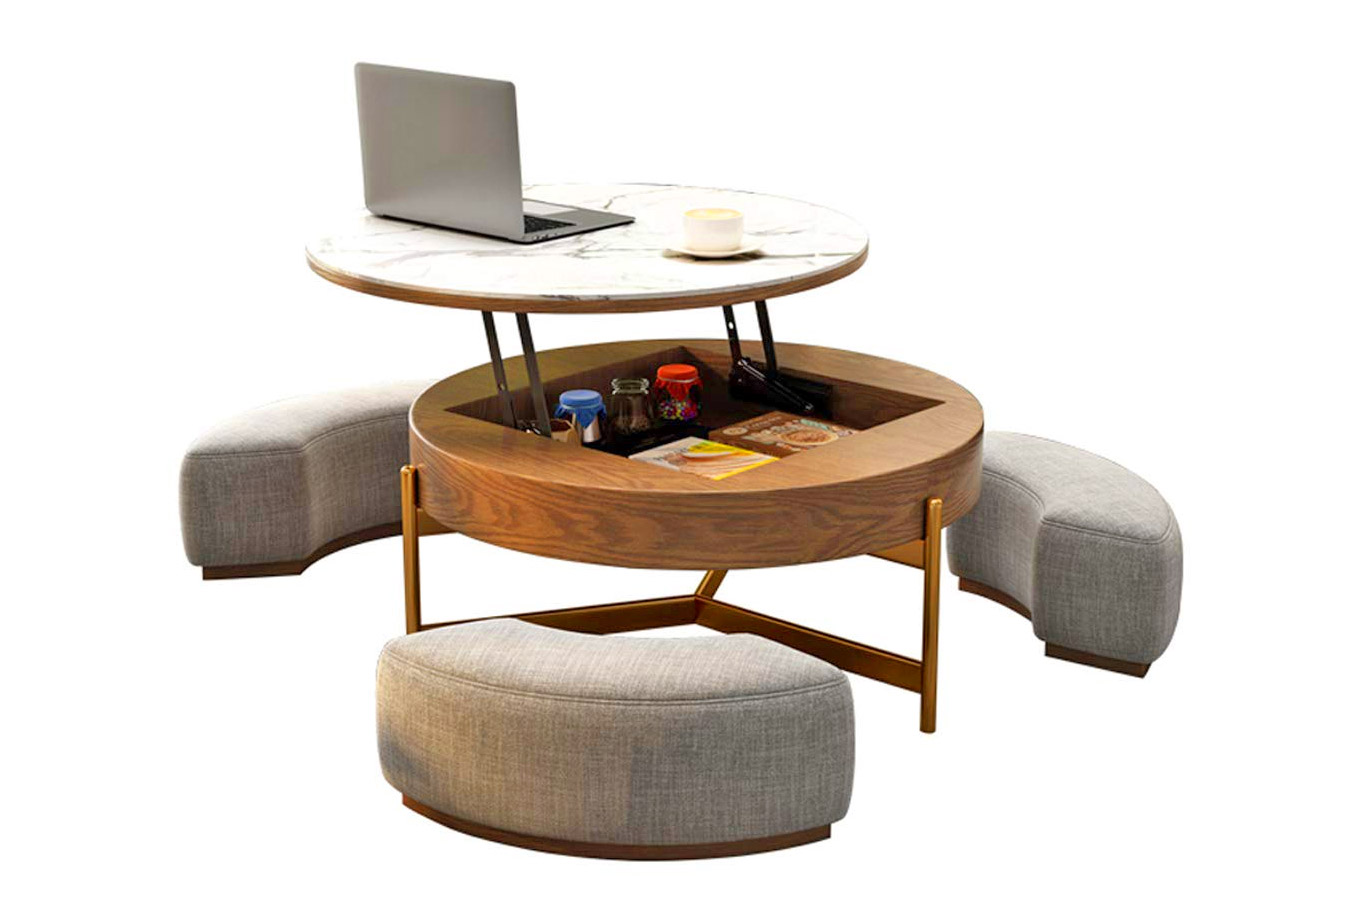 Amazing Rising Coffee Table Has 3 Integrated Ottomans That Hide Underneath It - Creative Round Coffee Table and Liftable Desk 3 stools underneath table